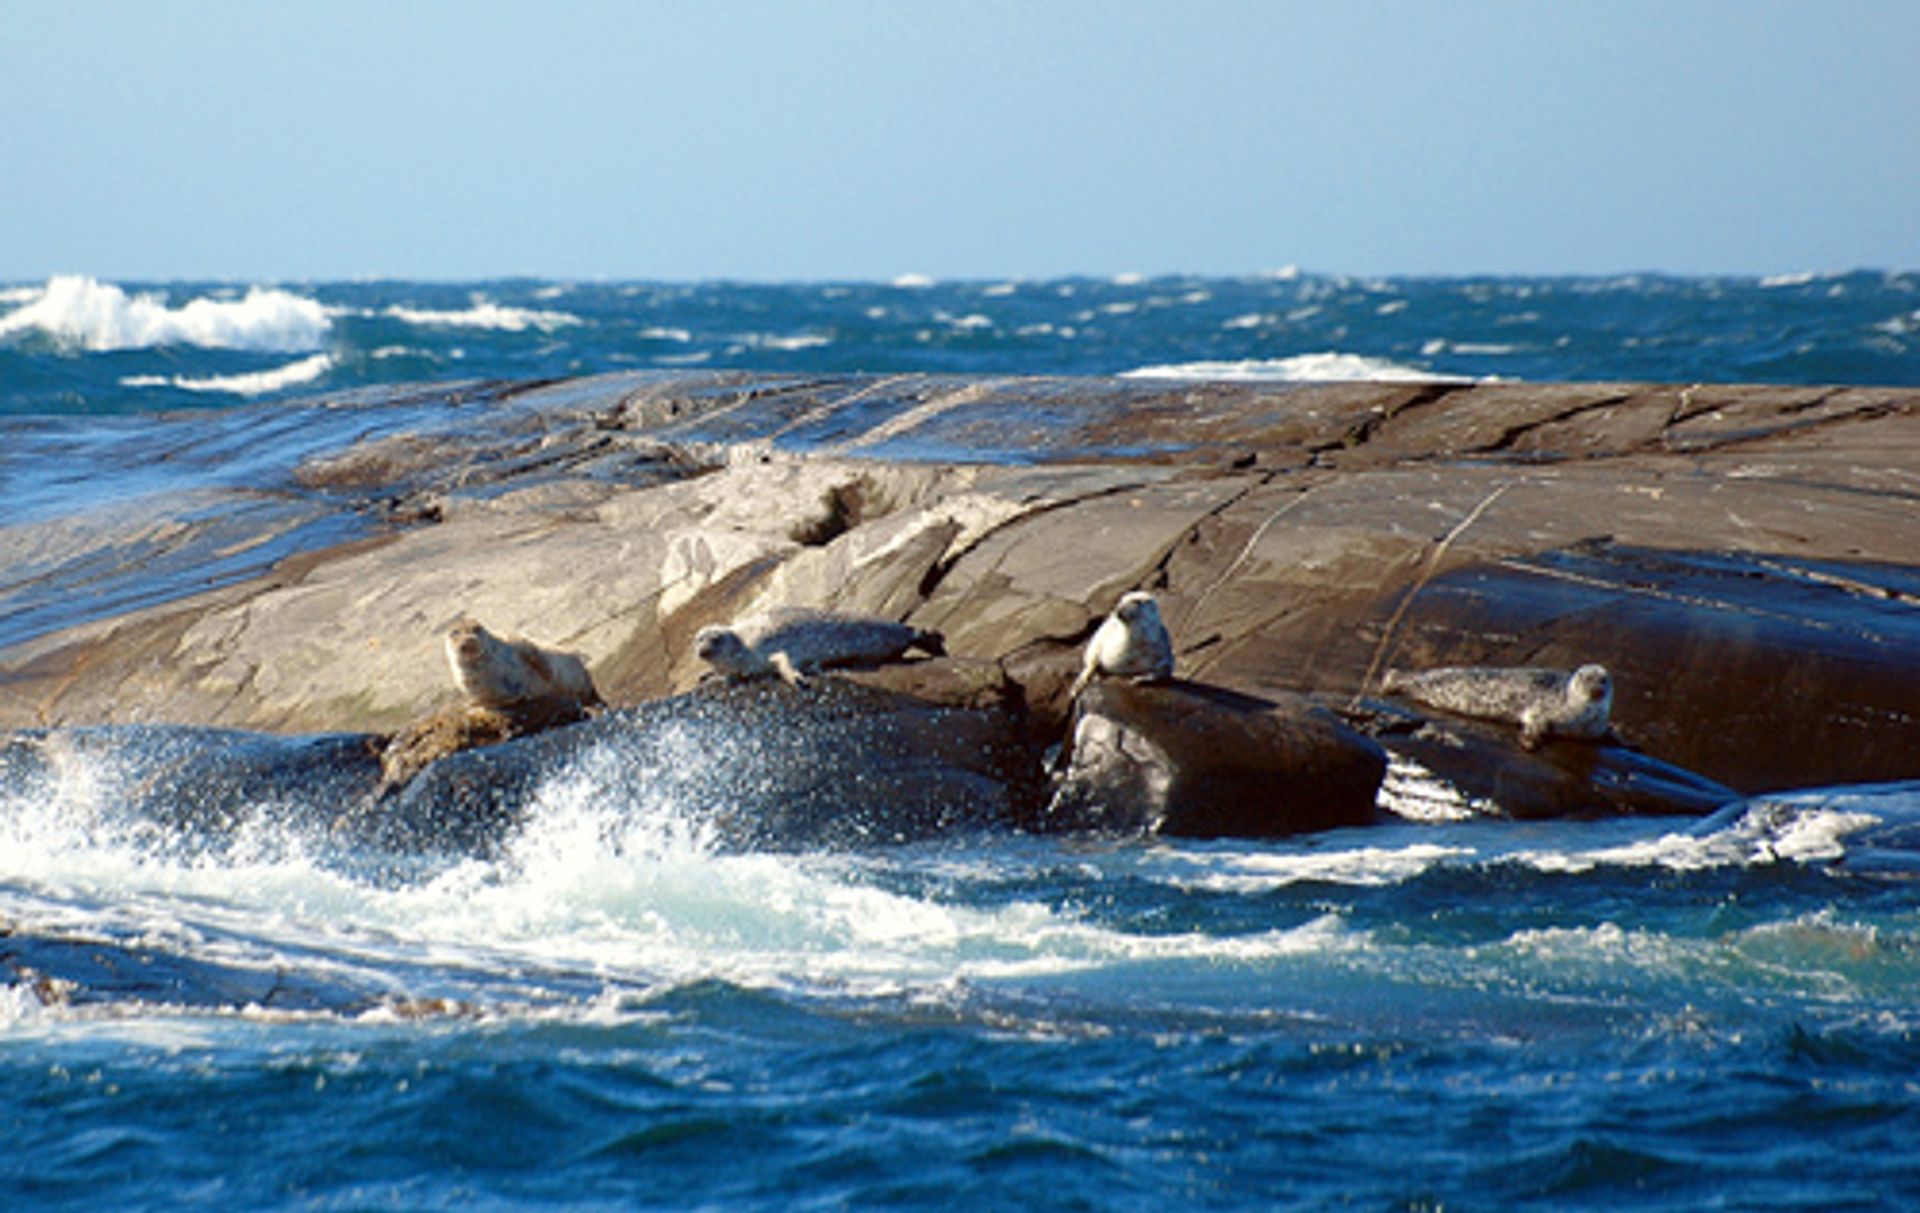 Seals lie on rocks in the sea.